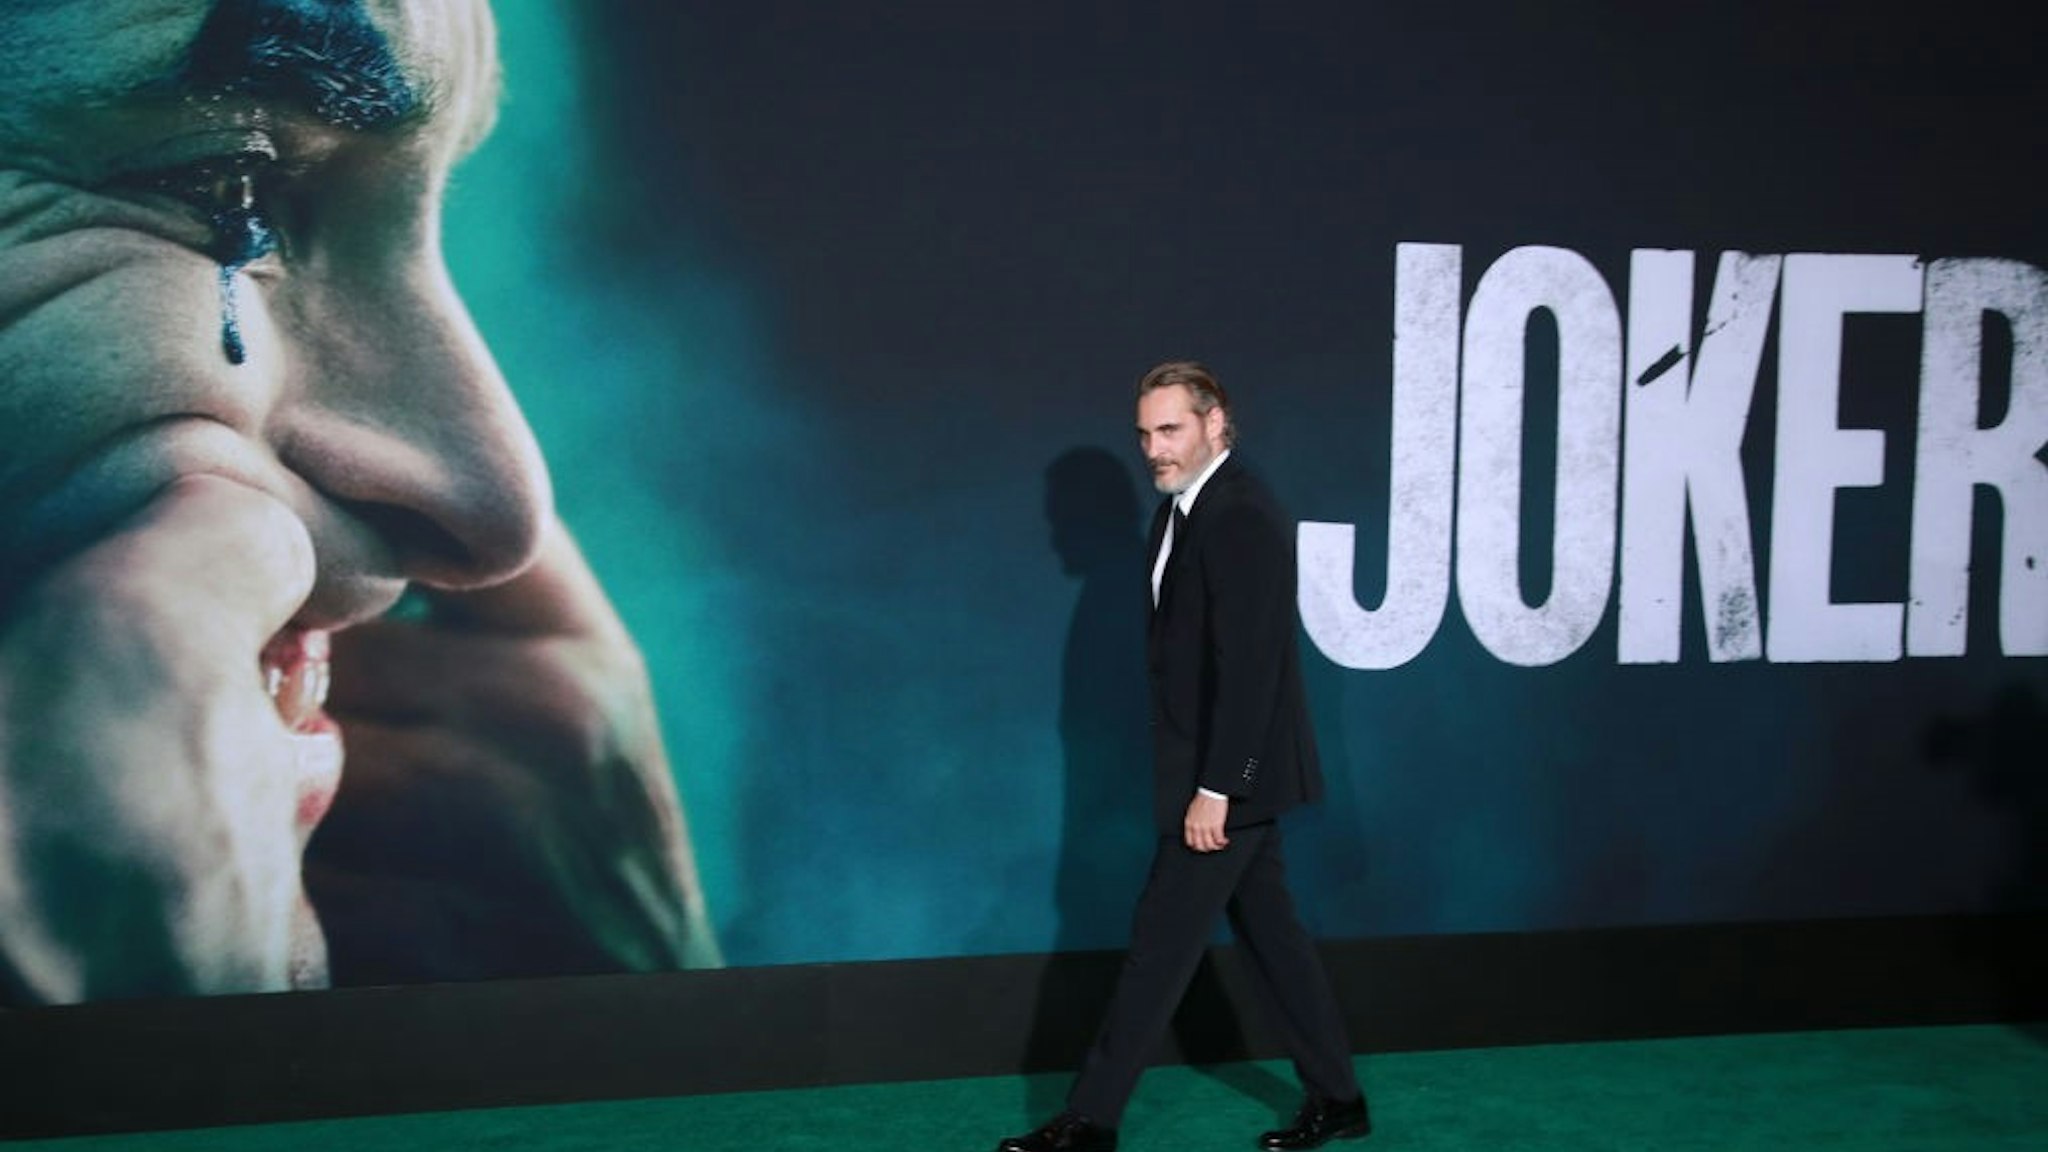 Joaquin Phoenix attends the premiere of Warner Bros Pictures "Joker" on September 28, 2019 in Hollywood, California.